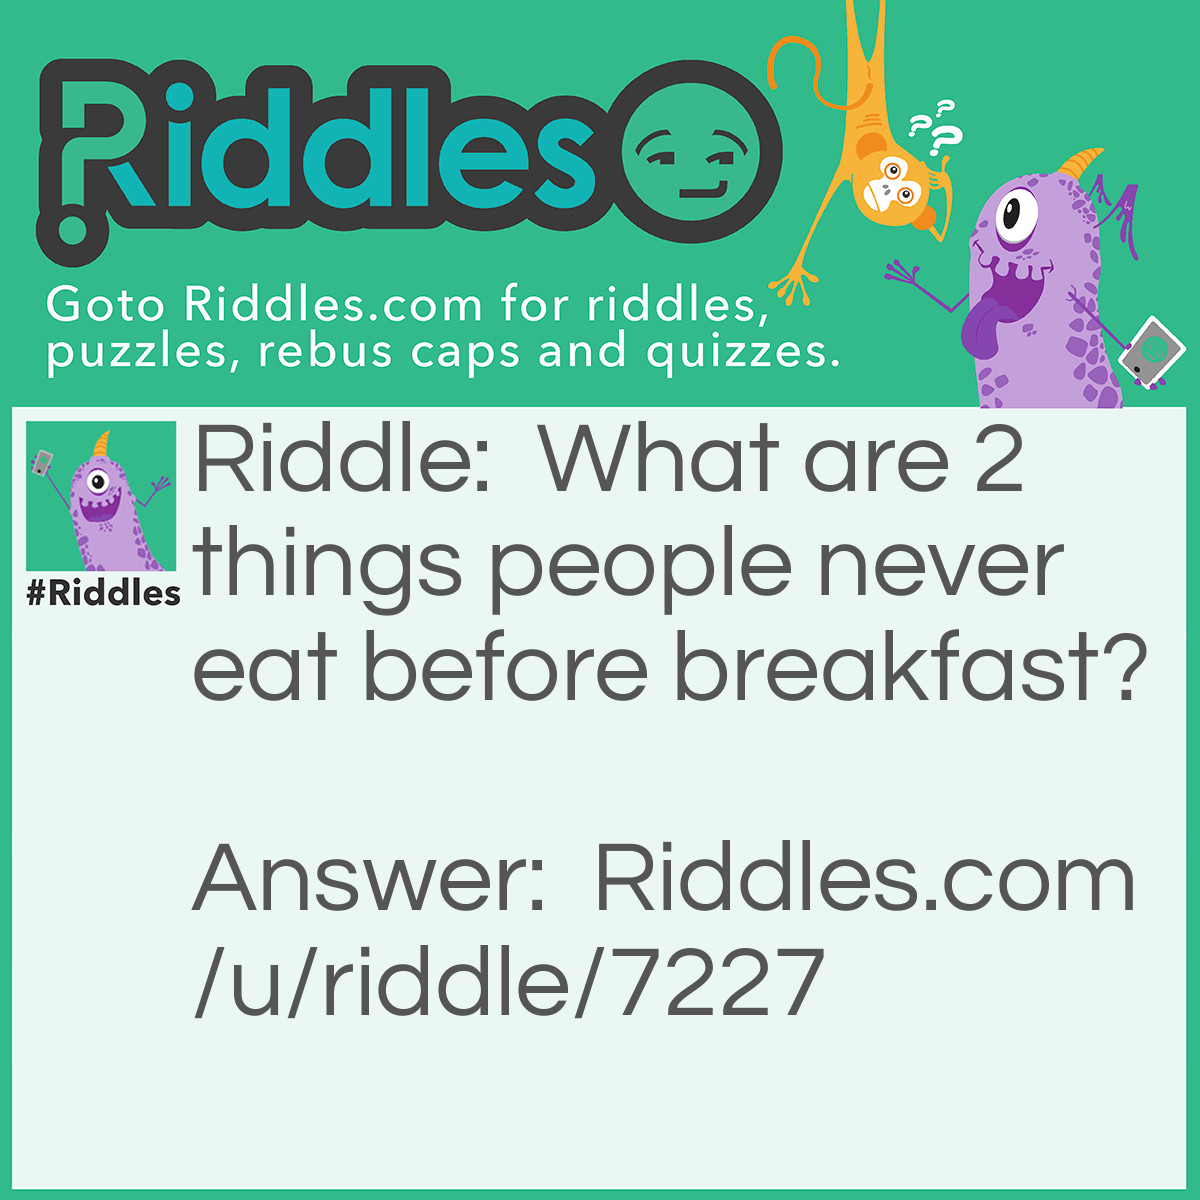 Riddle: What are 2 things people never eat before breakfast? Answer: Lunch + Dinner.